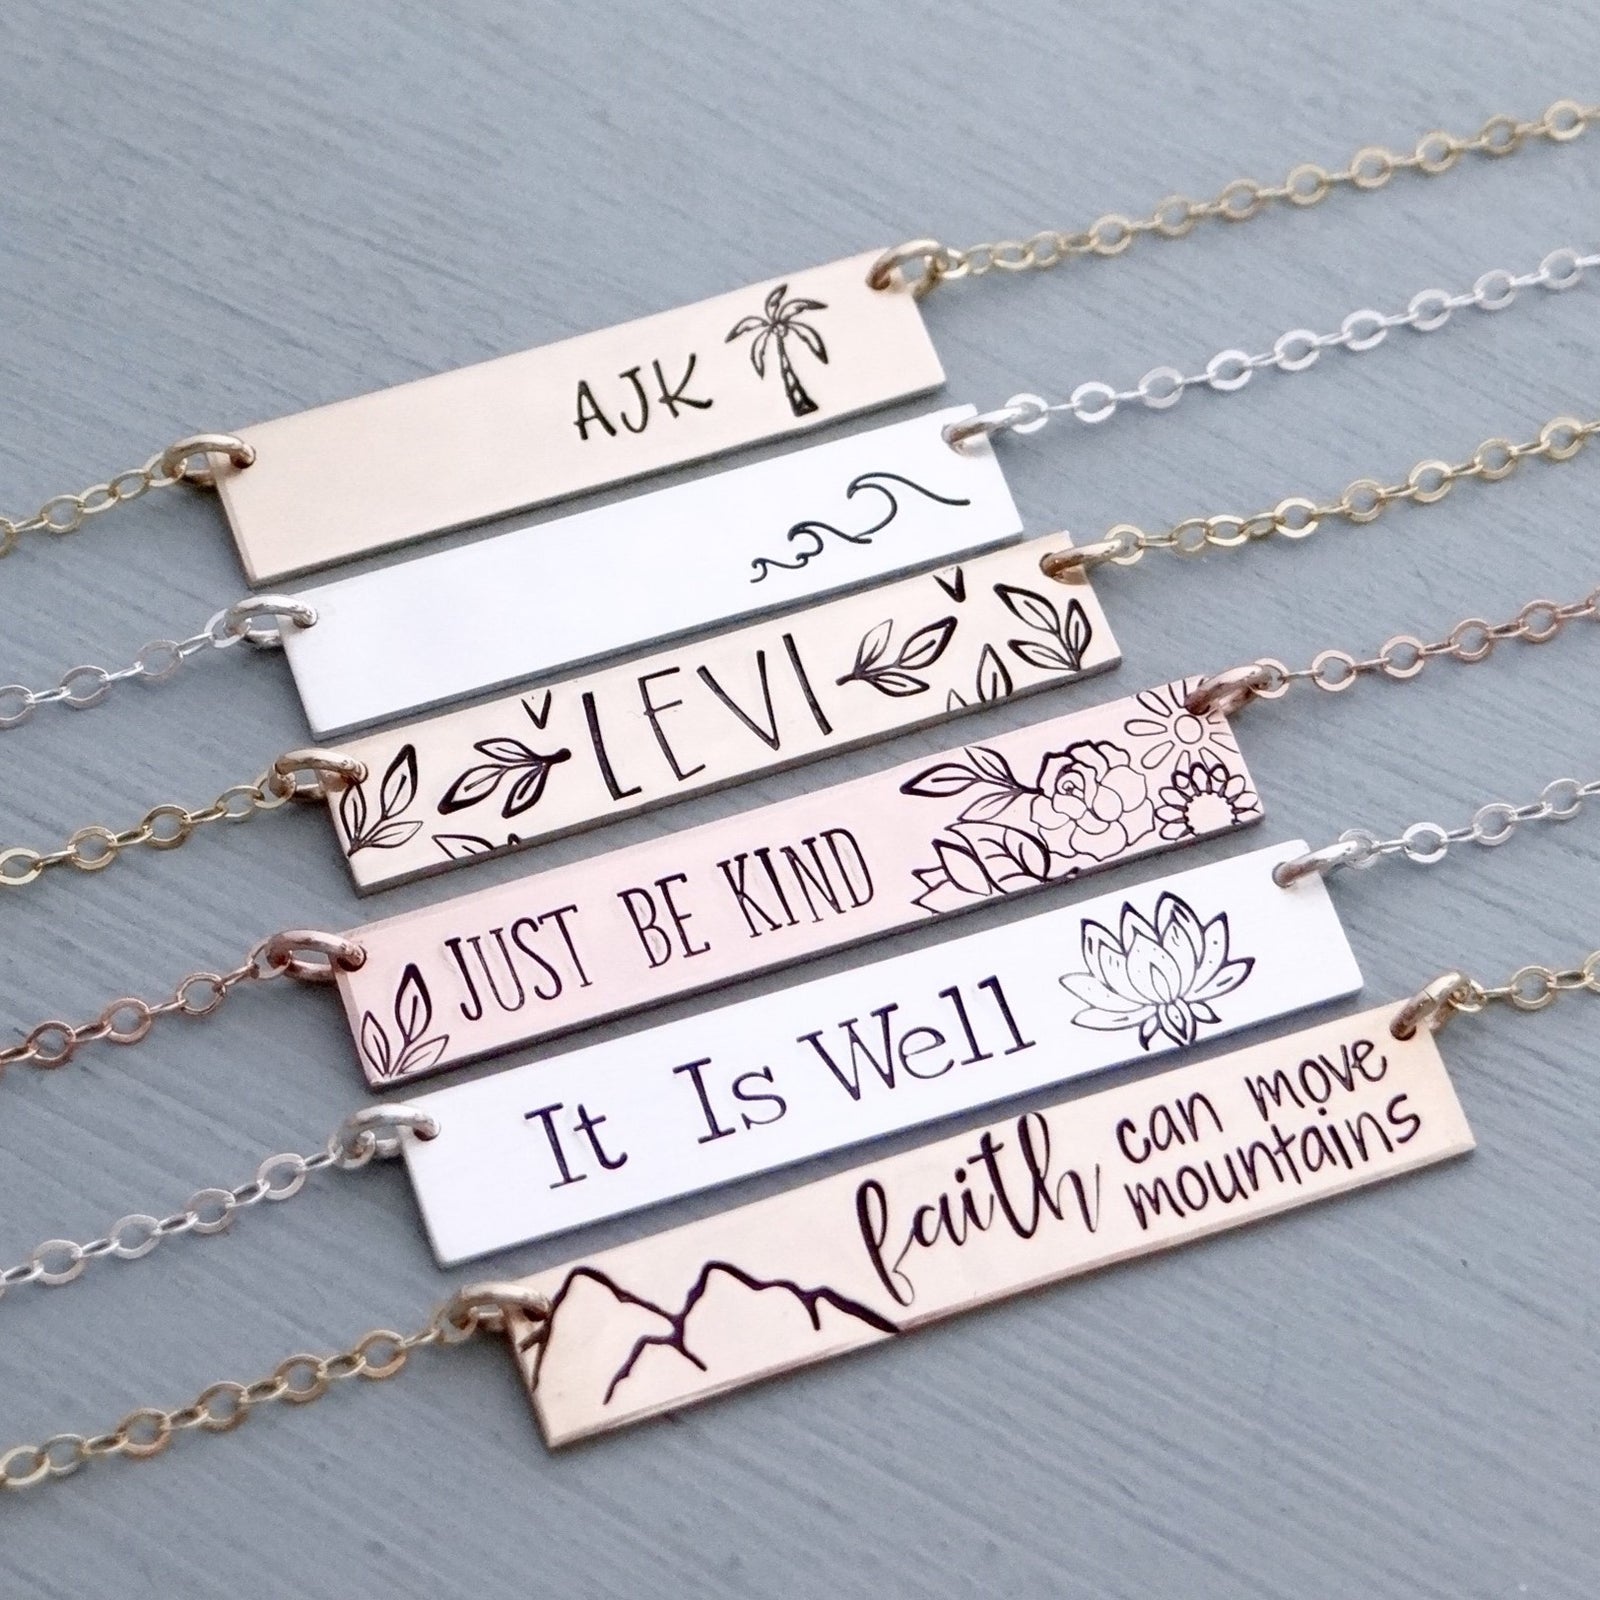 Artist turns “untranslatable words” from various languages into beautiful  necklaces 【Pics】 | SoraNews24 -Japan News-